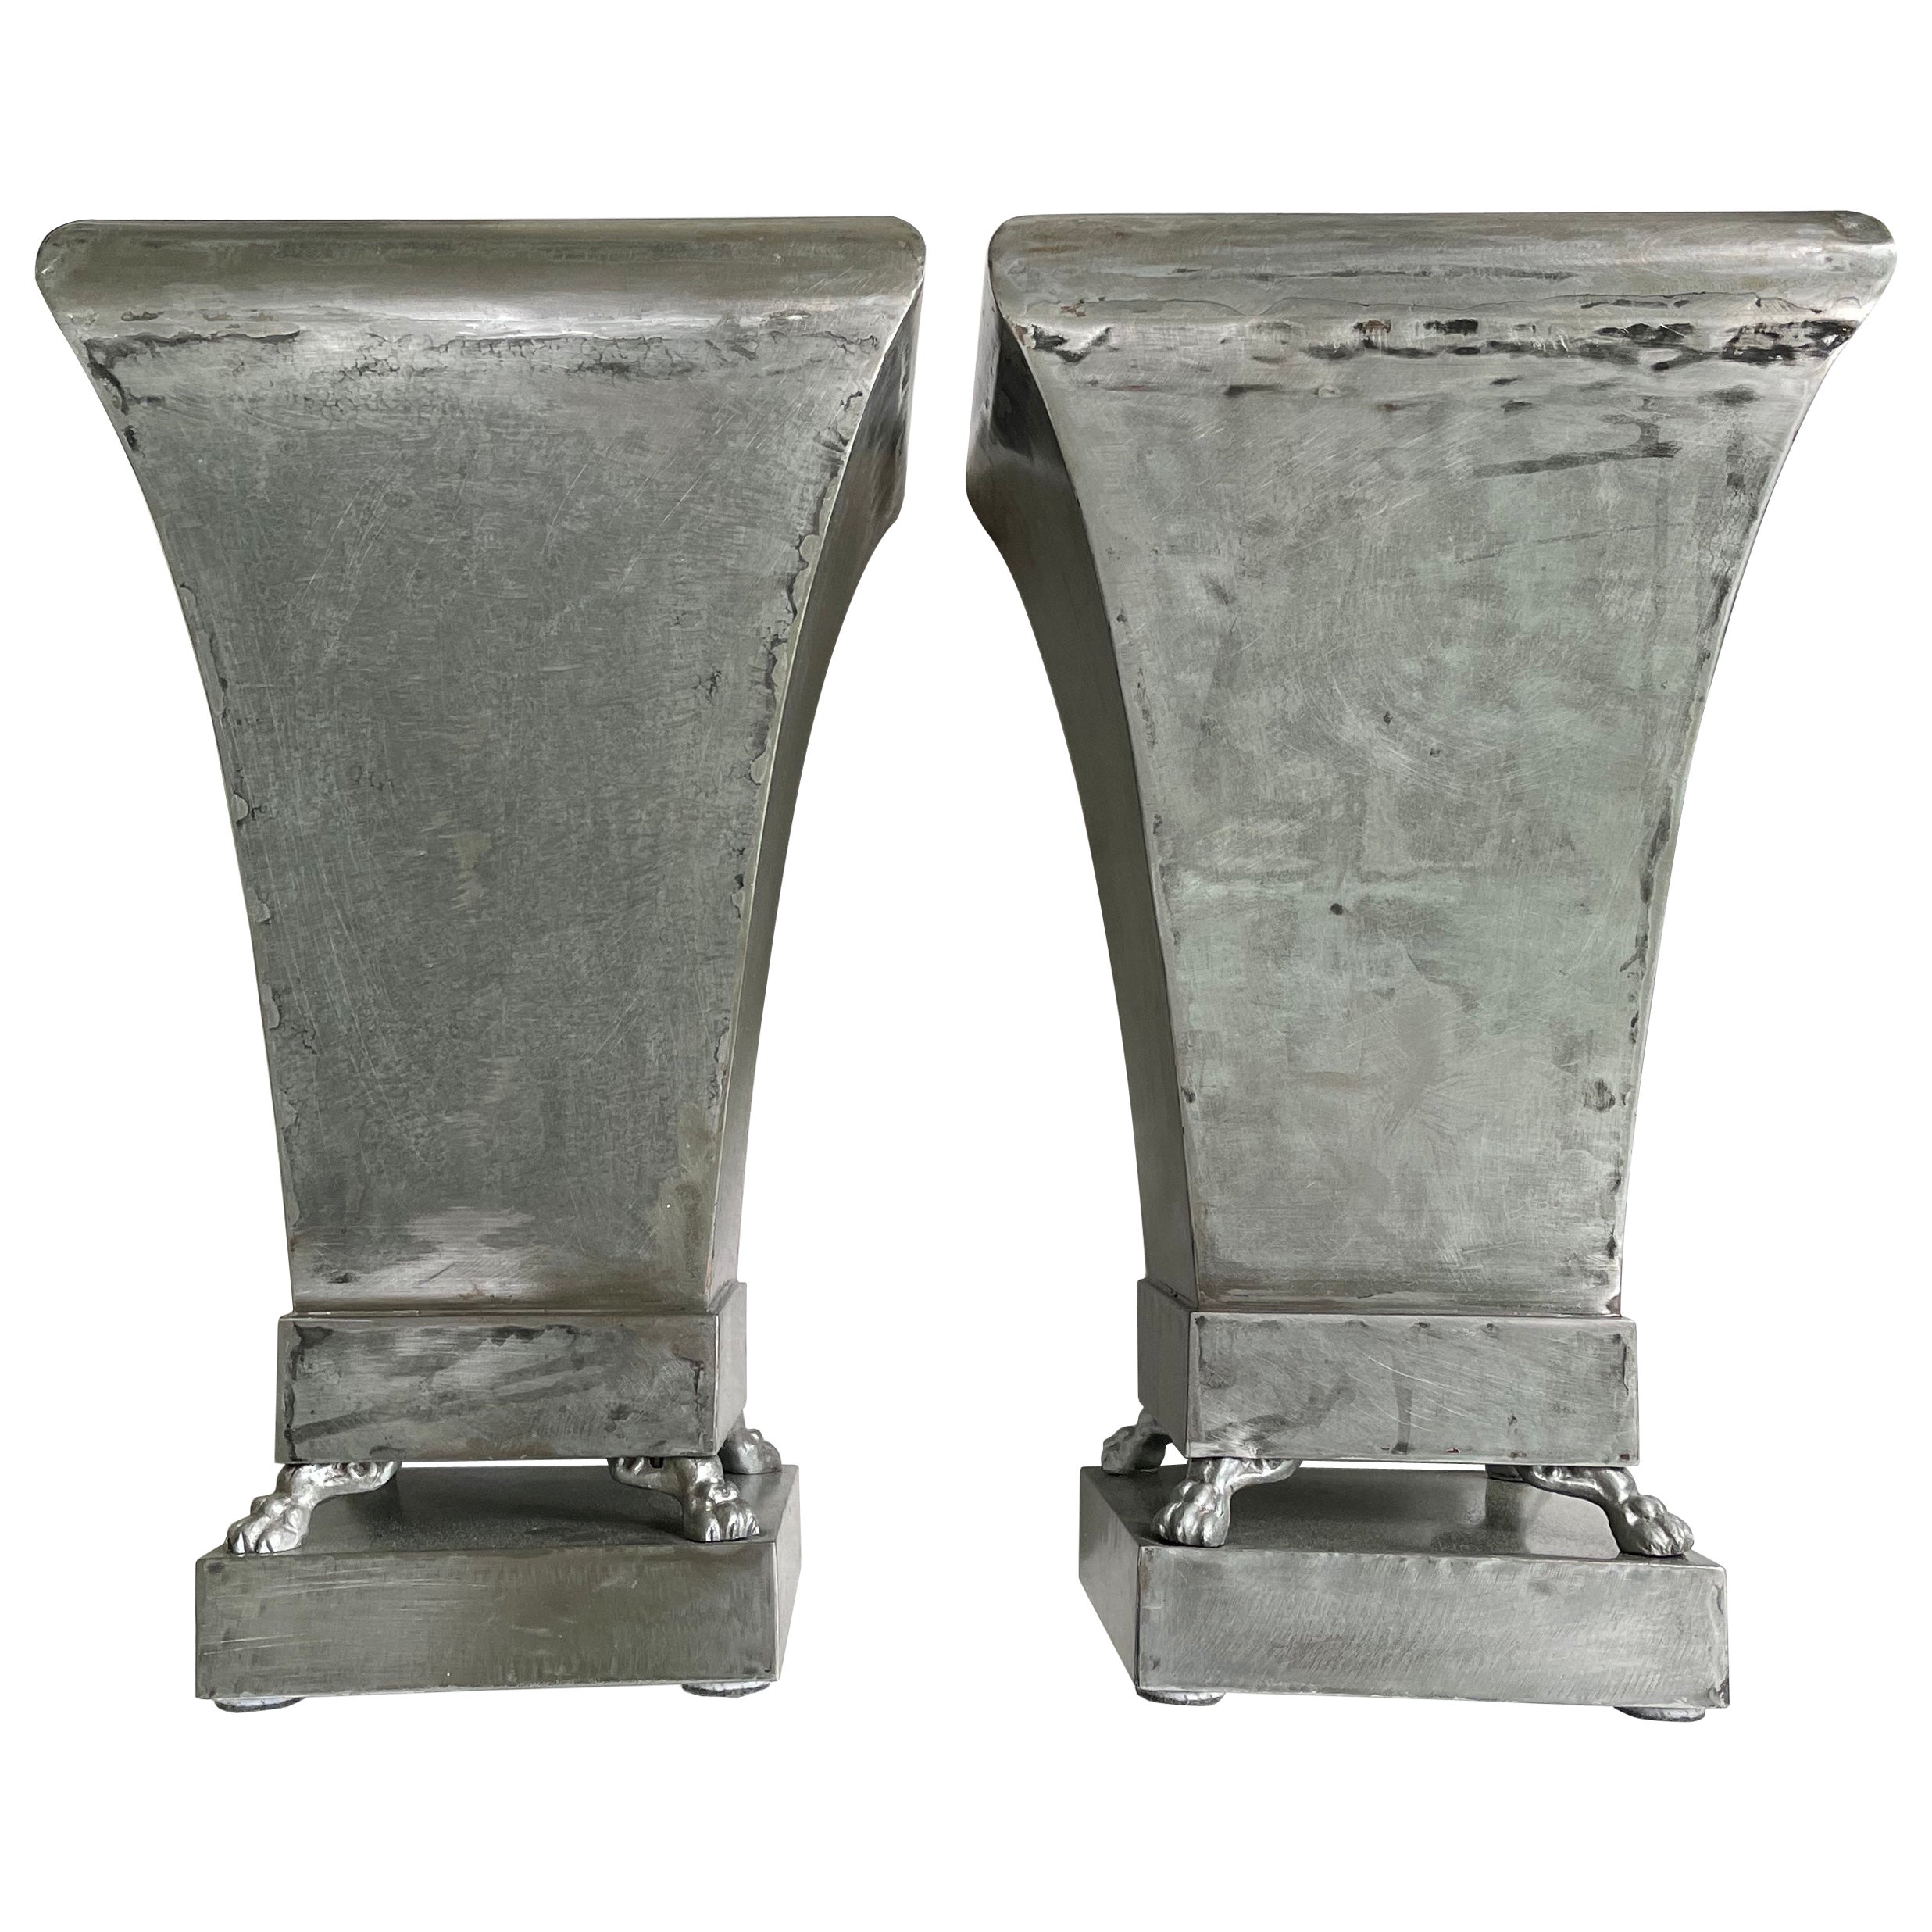 Pair Silvered Metal Cachepot Planters